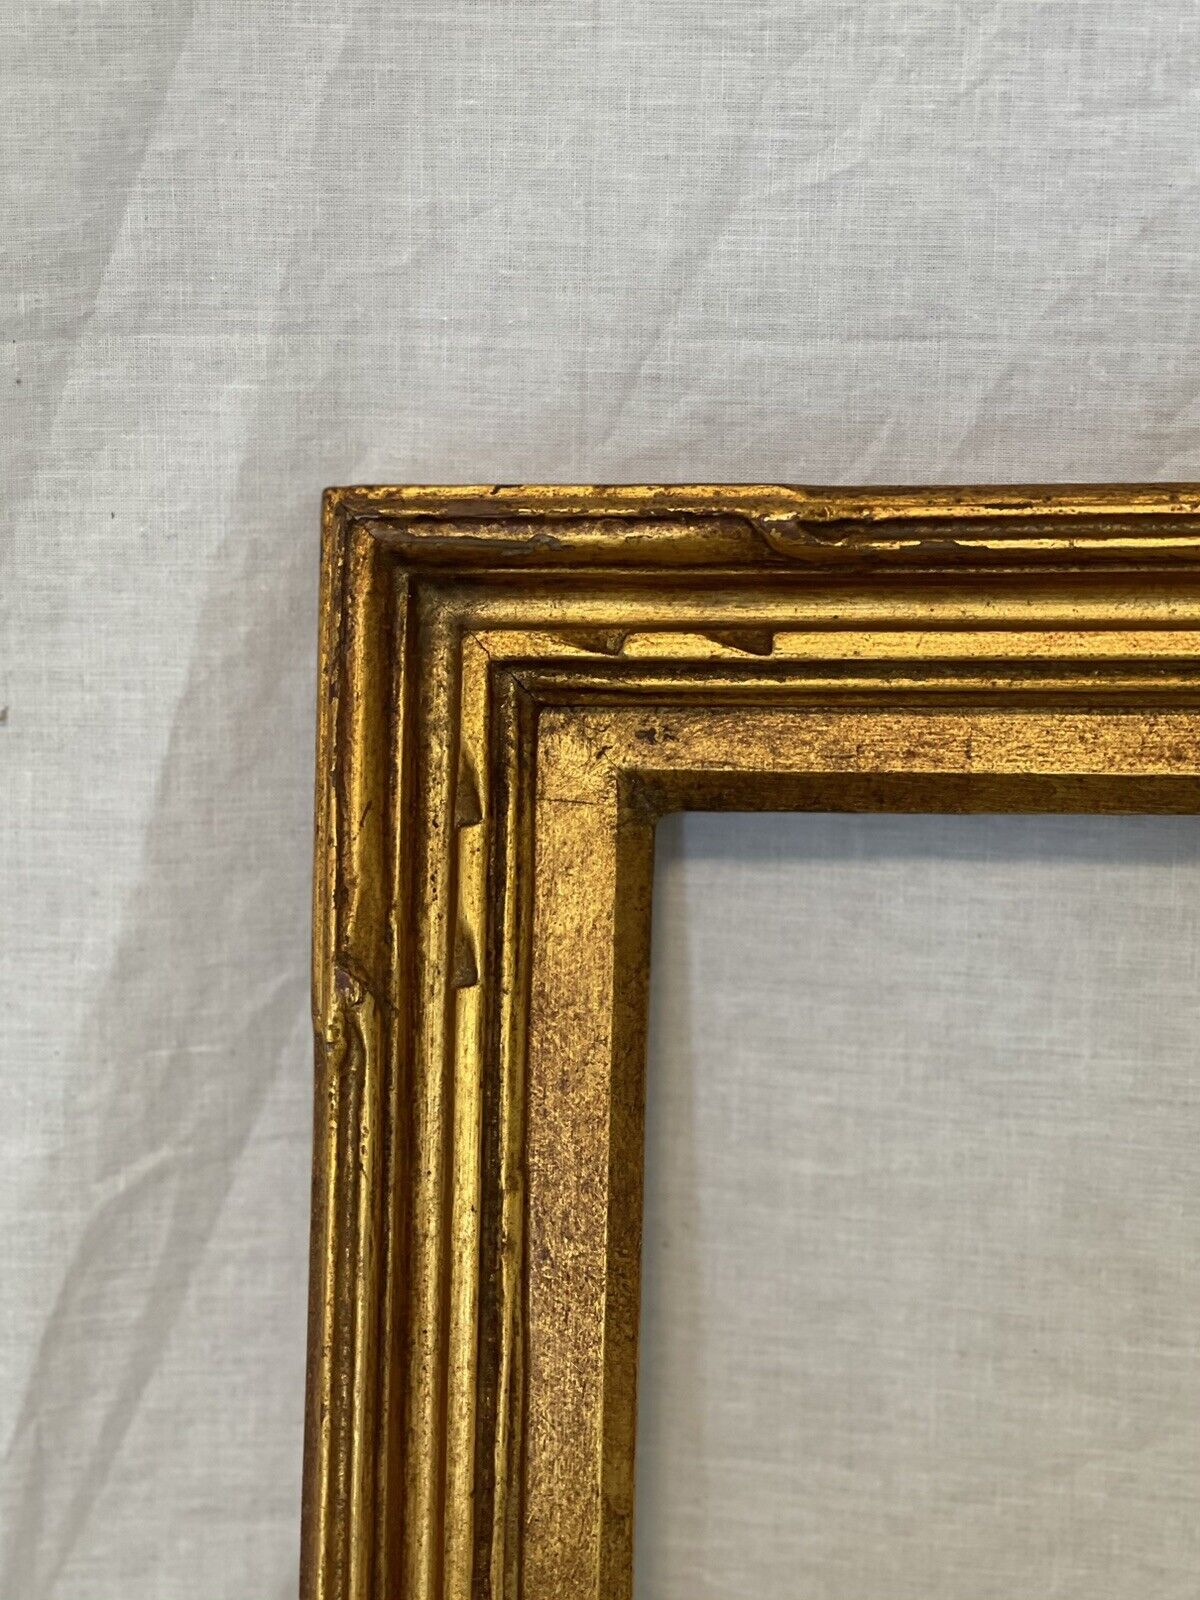 ANTIQUE FITs 14”x17” TAOS SCHOOL CARVED GOLD GILT ARTS & CRAFTS PICTURE FRAME